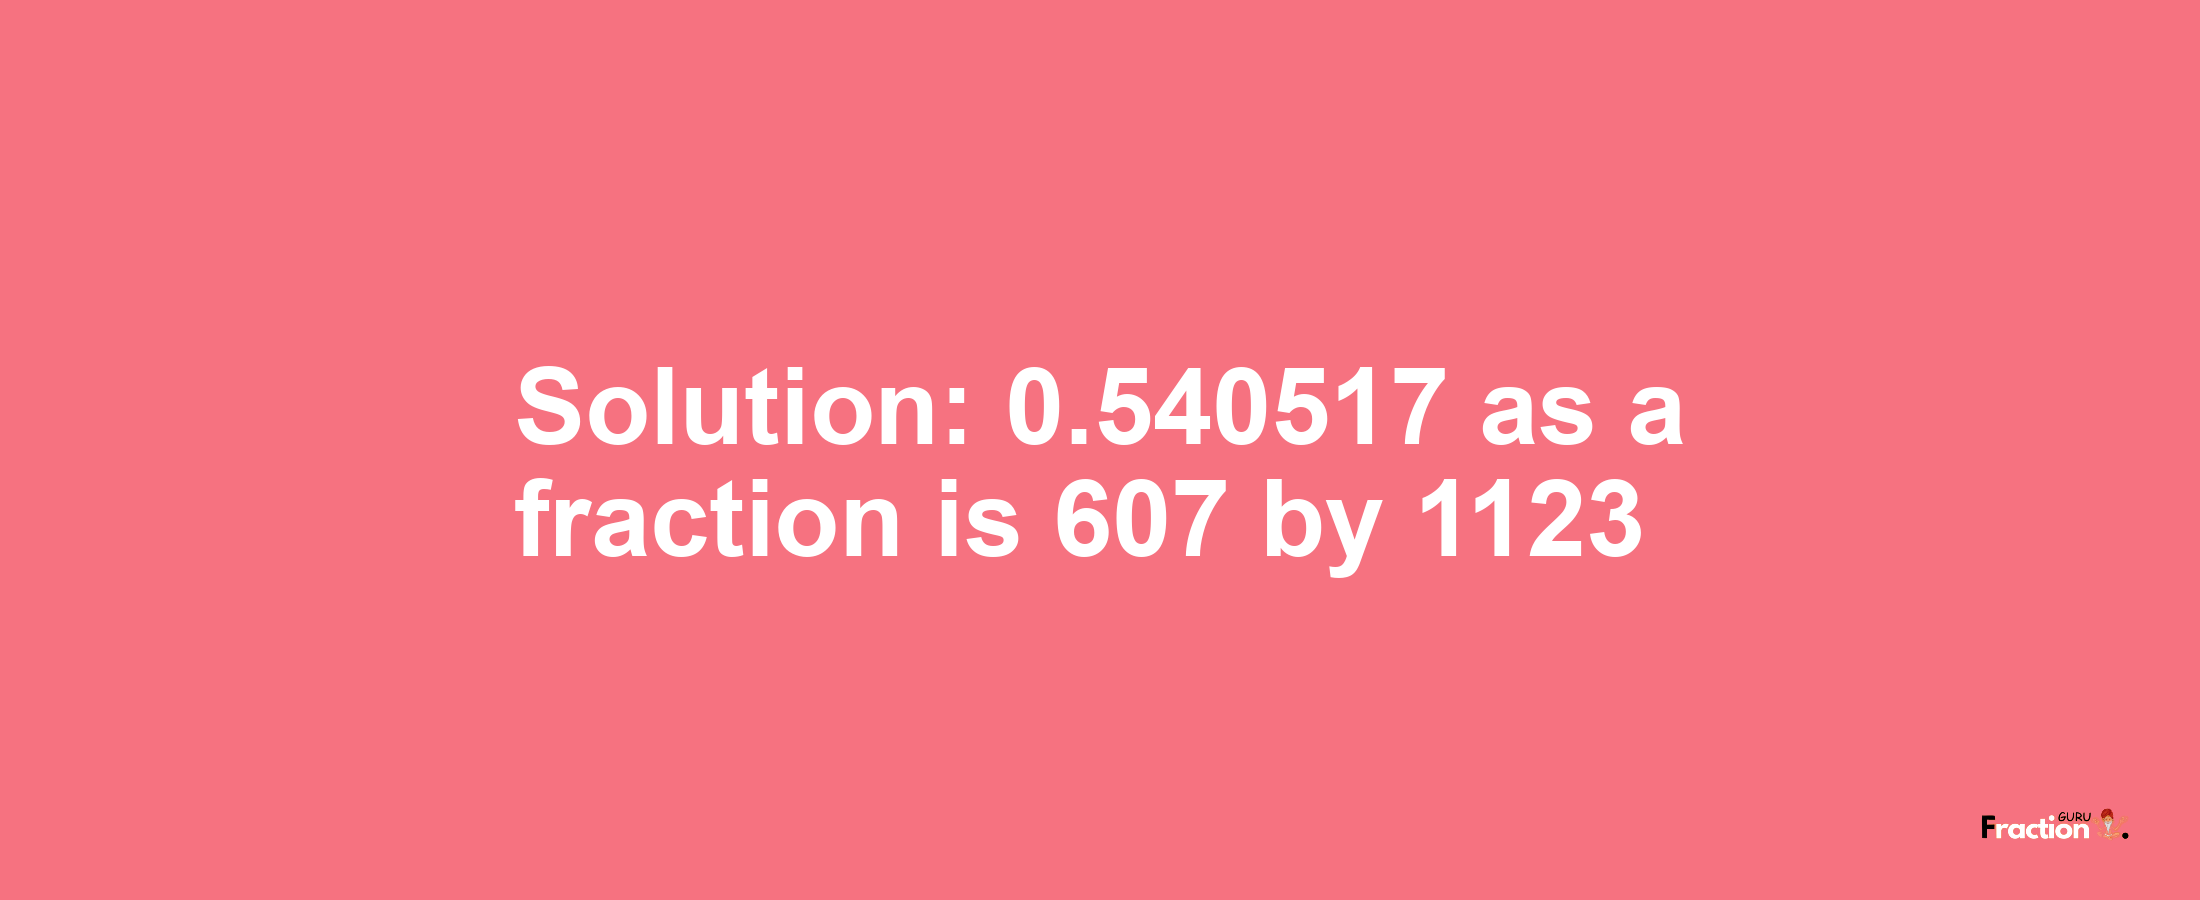 Solution:0.540517 as a fraction is 607/1123